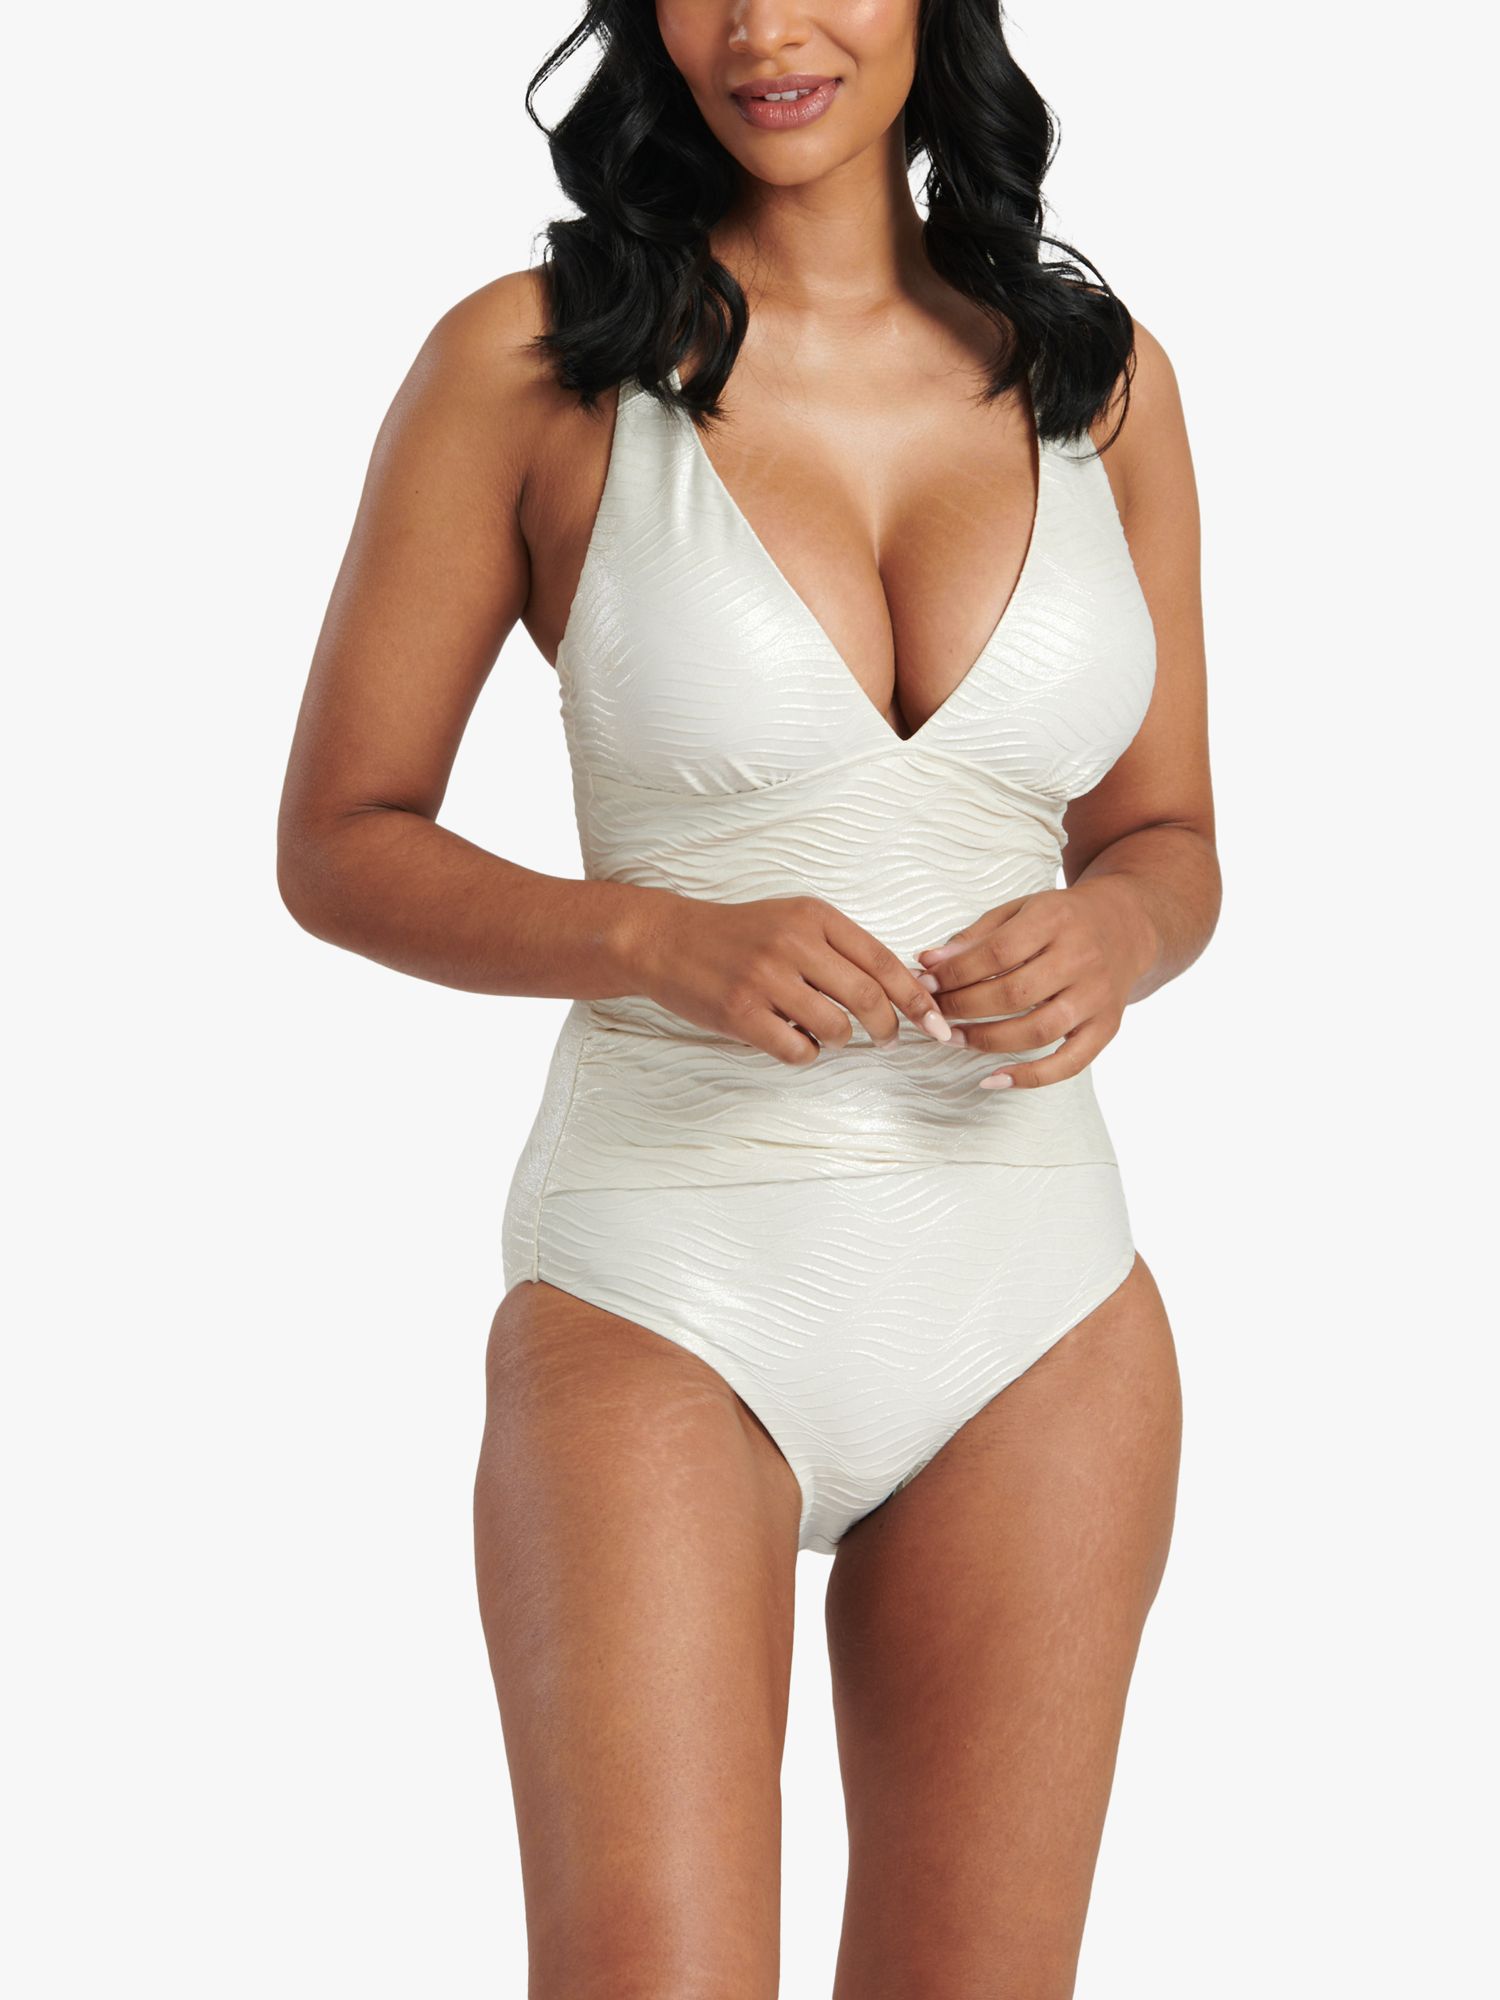 South Beach Shimmer Texture Tummy Control Swimsuit, Pearl, 8